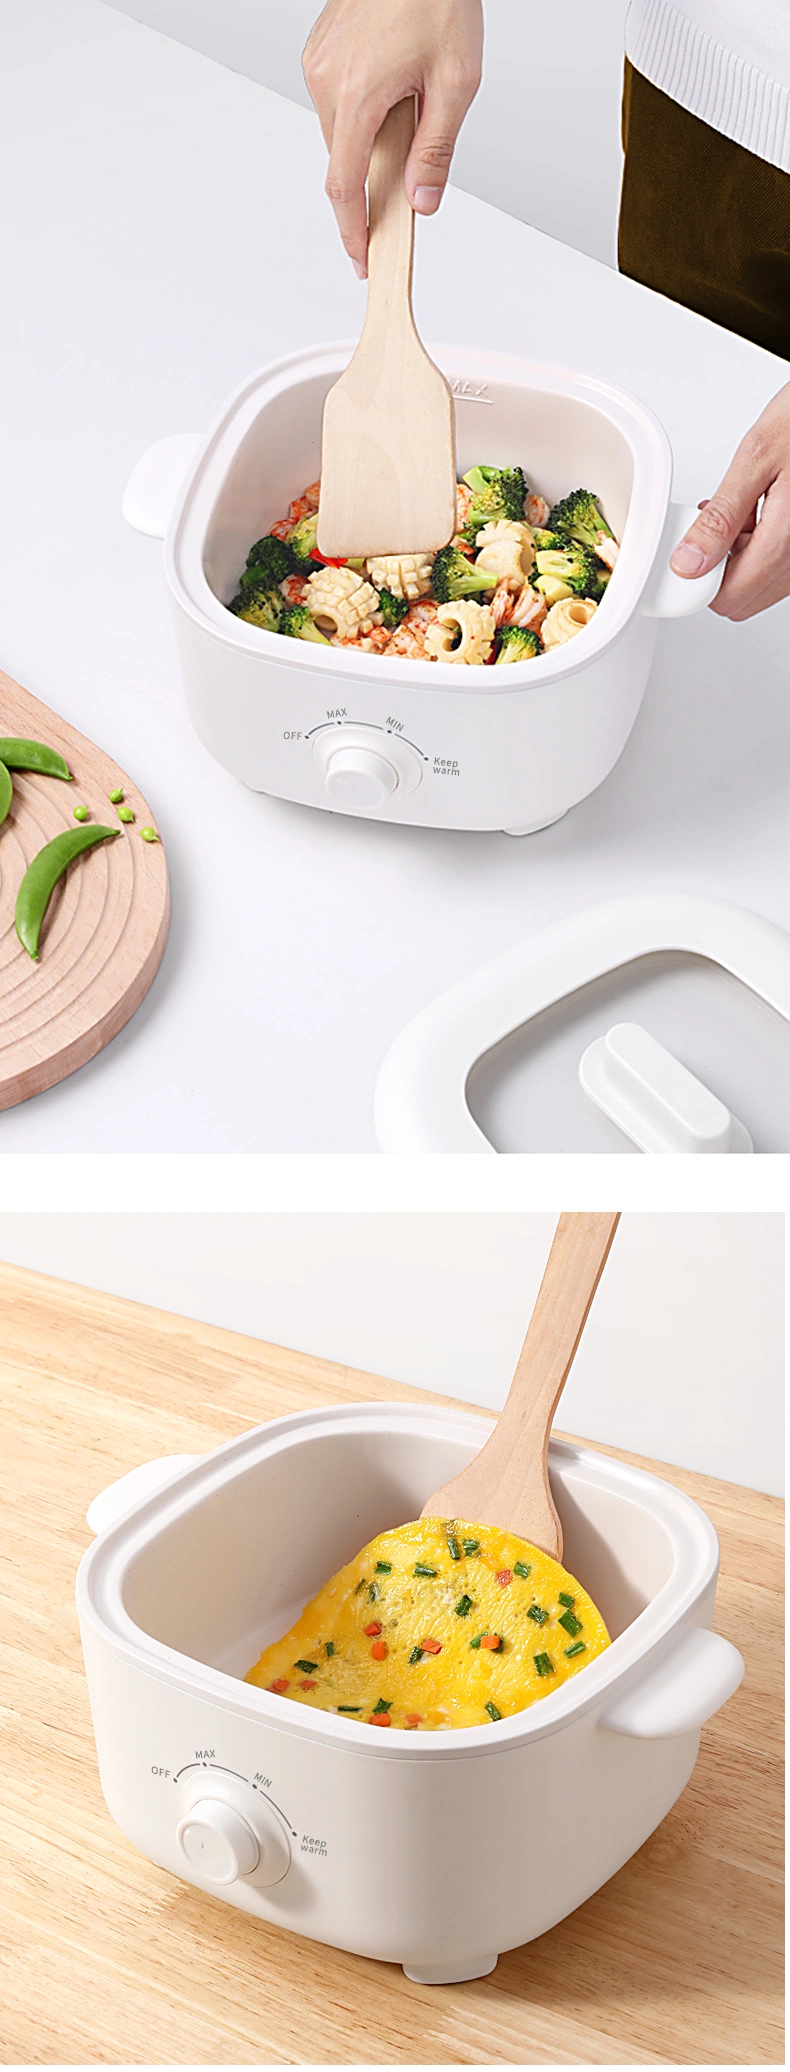 Mini Hot Pot Electric Cooking Electric Stock Pot with Steamer Multi Function Electric Cooker